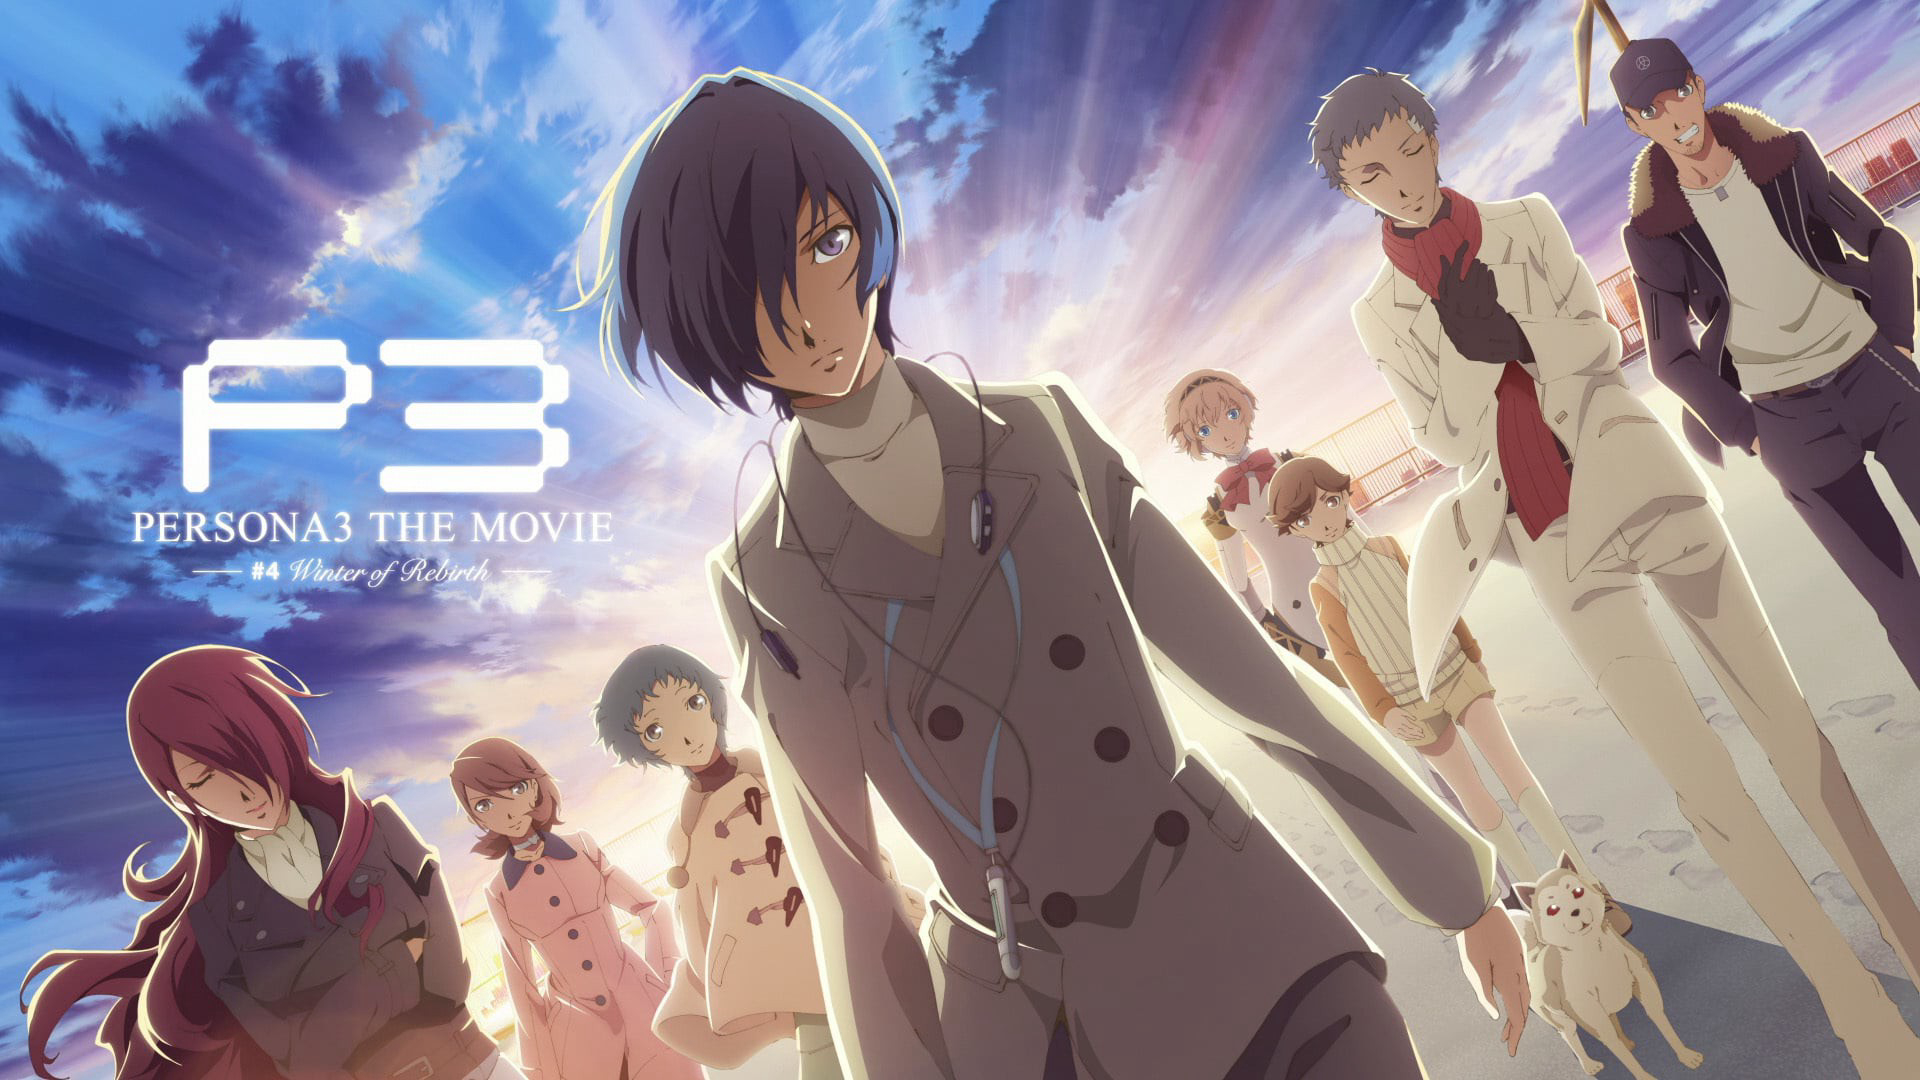 Banner Phim Persona 3 the Movie 4: Winter of Rebirth (PERSONA3 THE MOVIE #4 Winter of Rebirth)